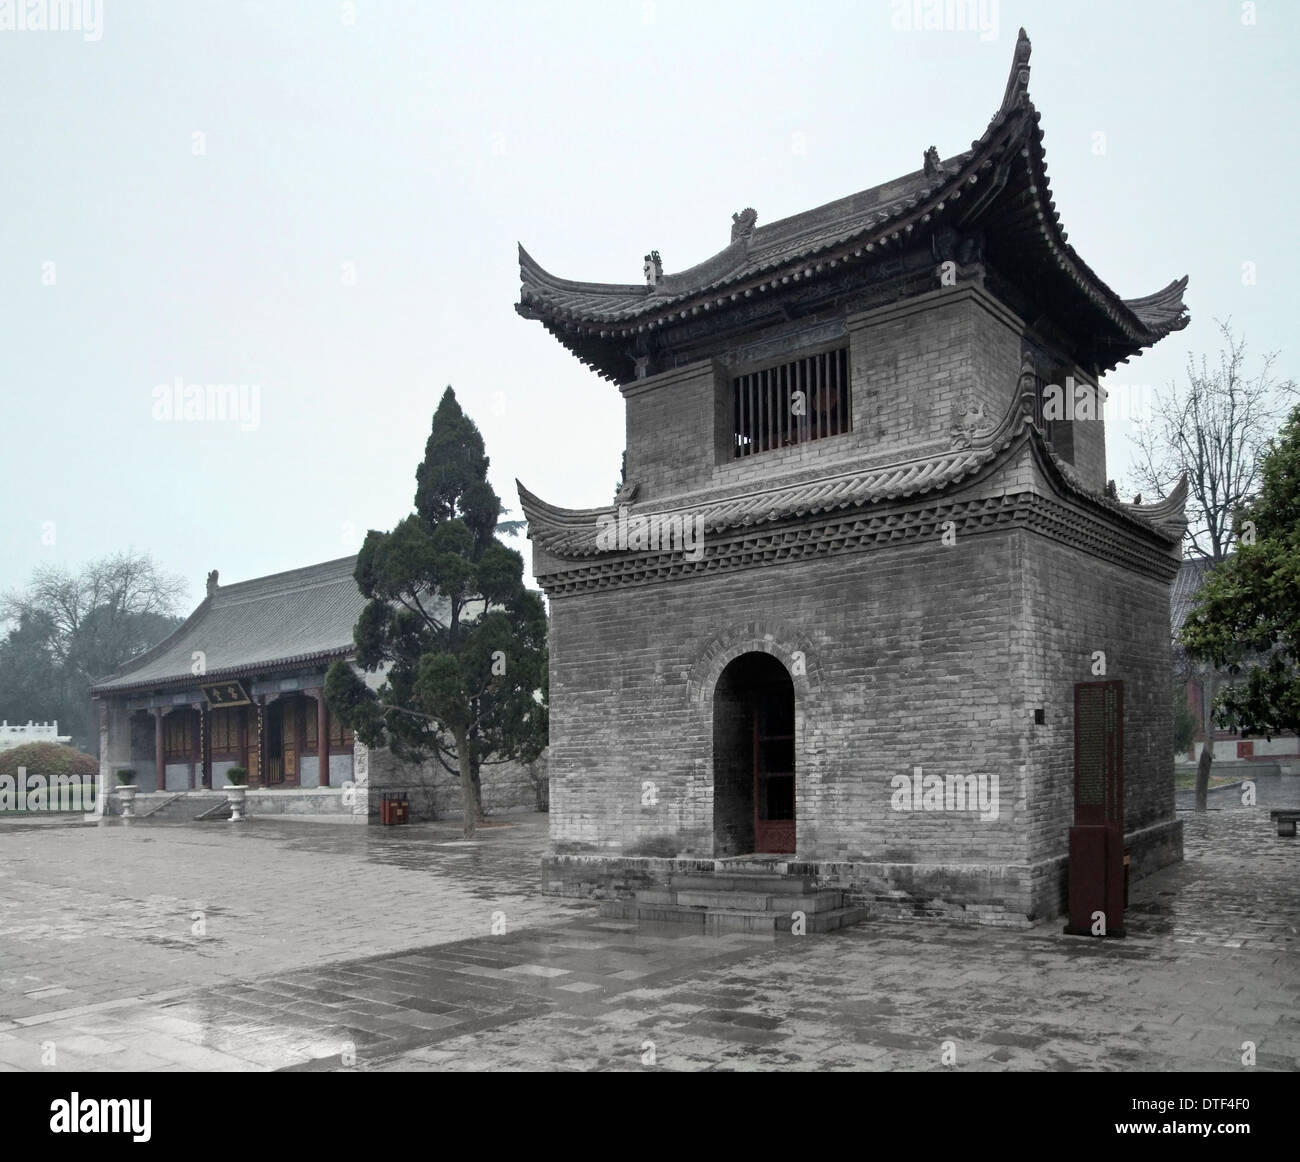 rainy scenery including traditional stone buildings in Xian (China) Stock Photo